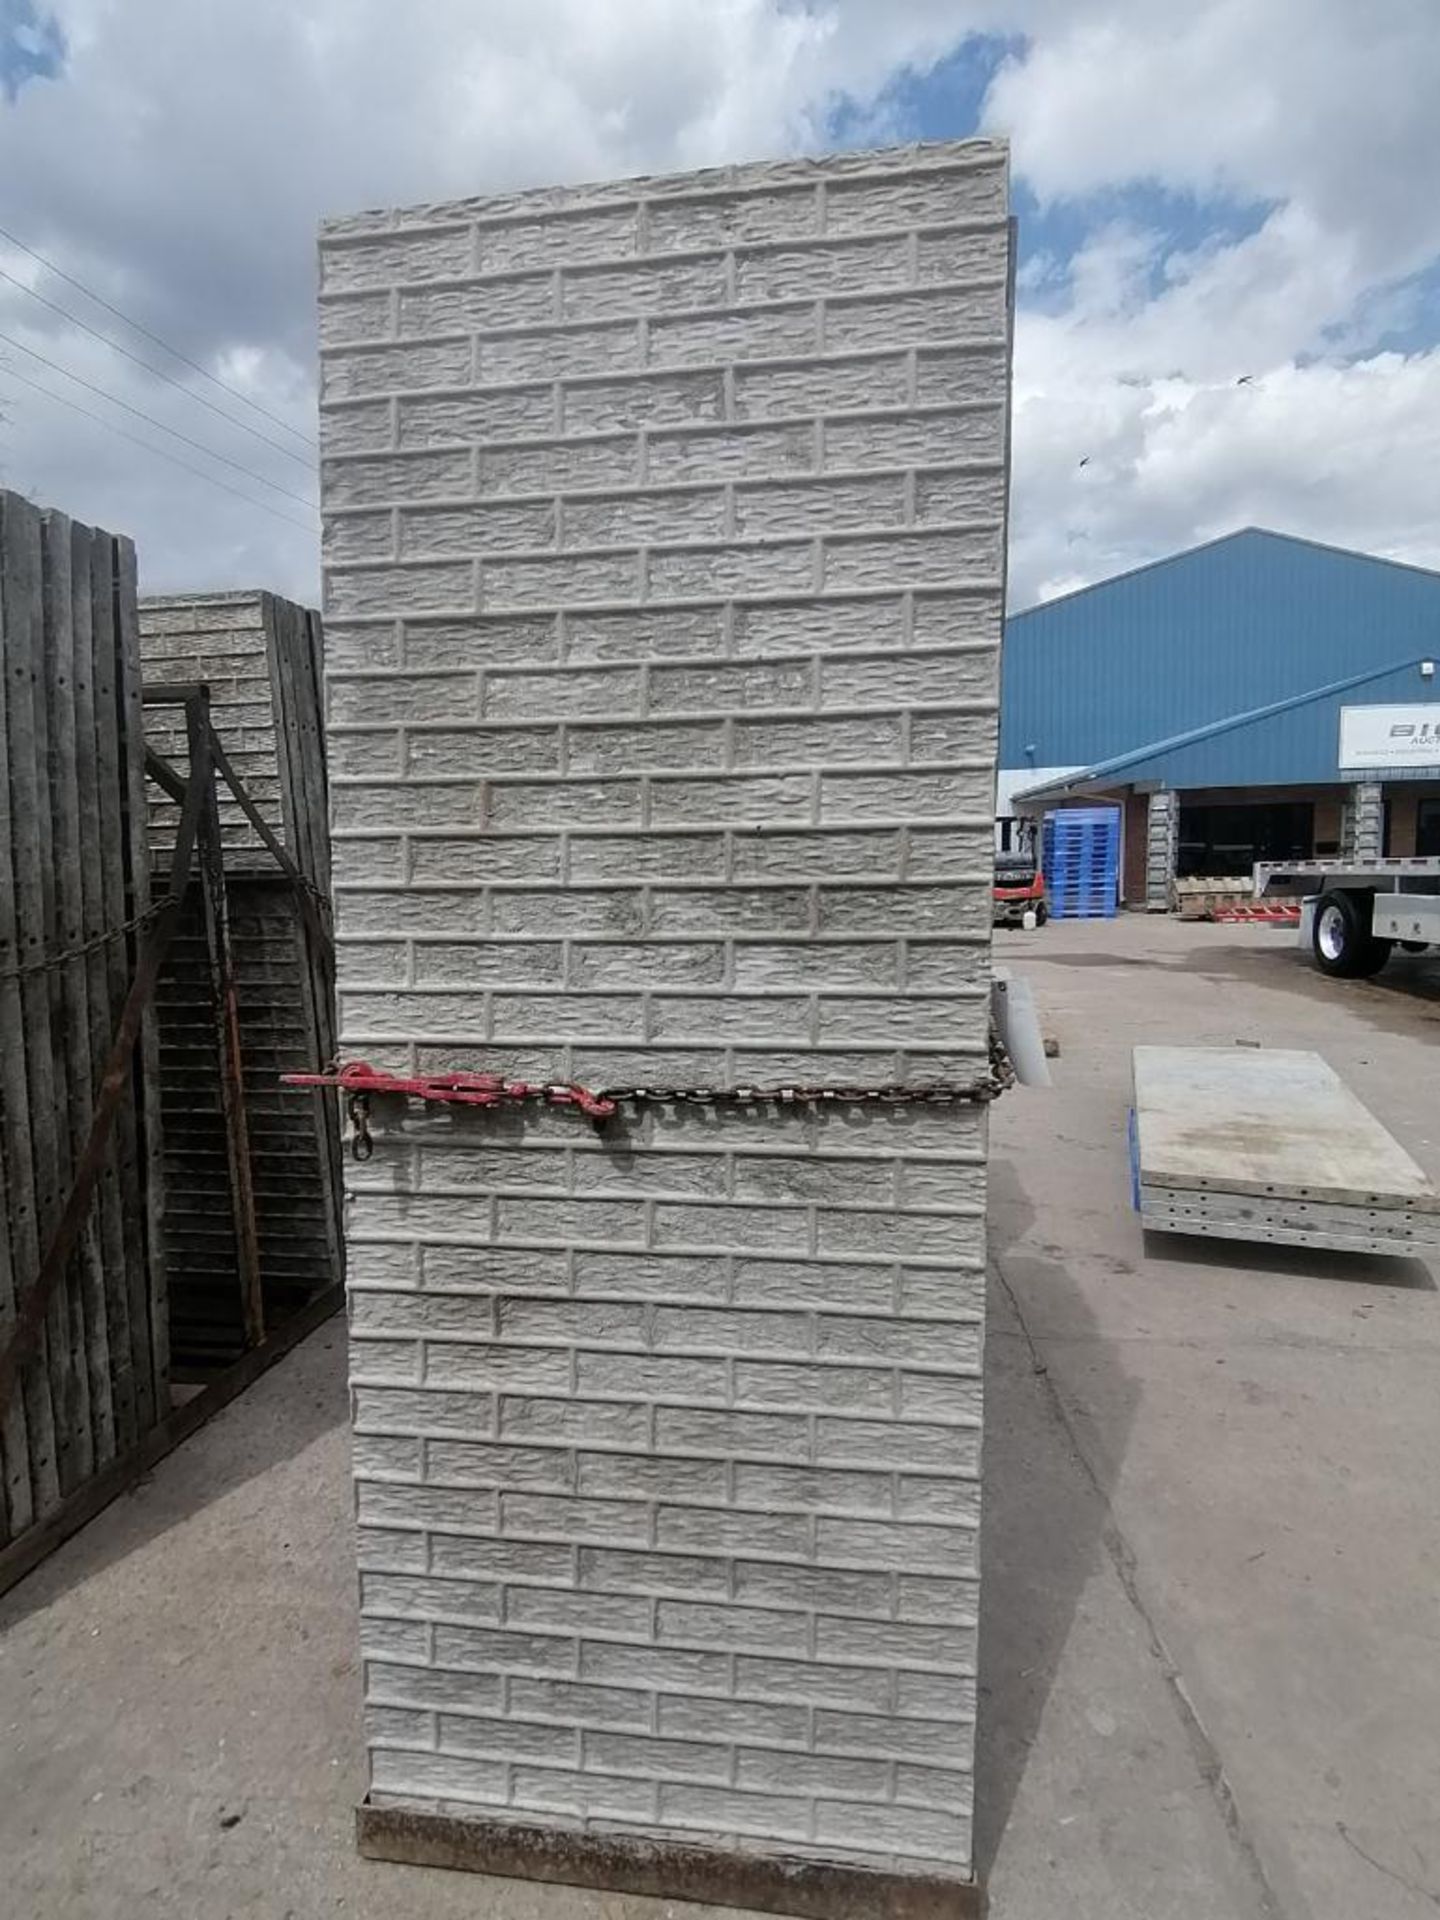 (27) 3' x 8' Wall-Ties Textured Brick Aluminum Concrete Forms 8" Hole Pattern, Basket is included. - Image 6 of 8